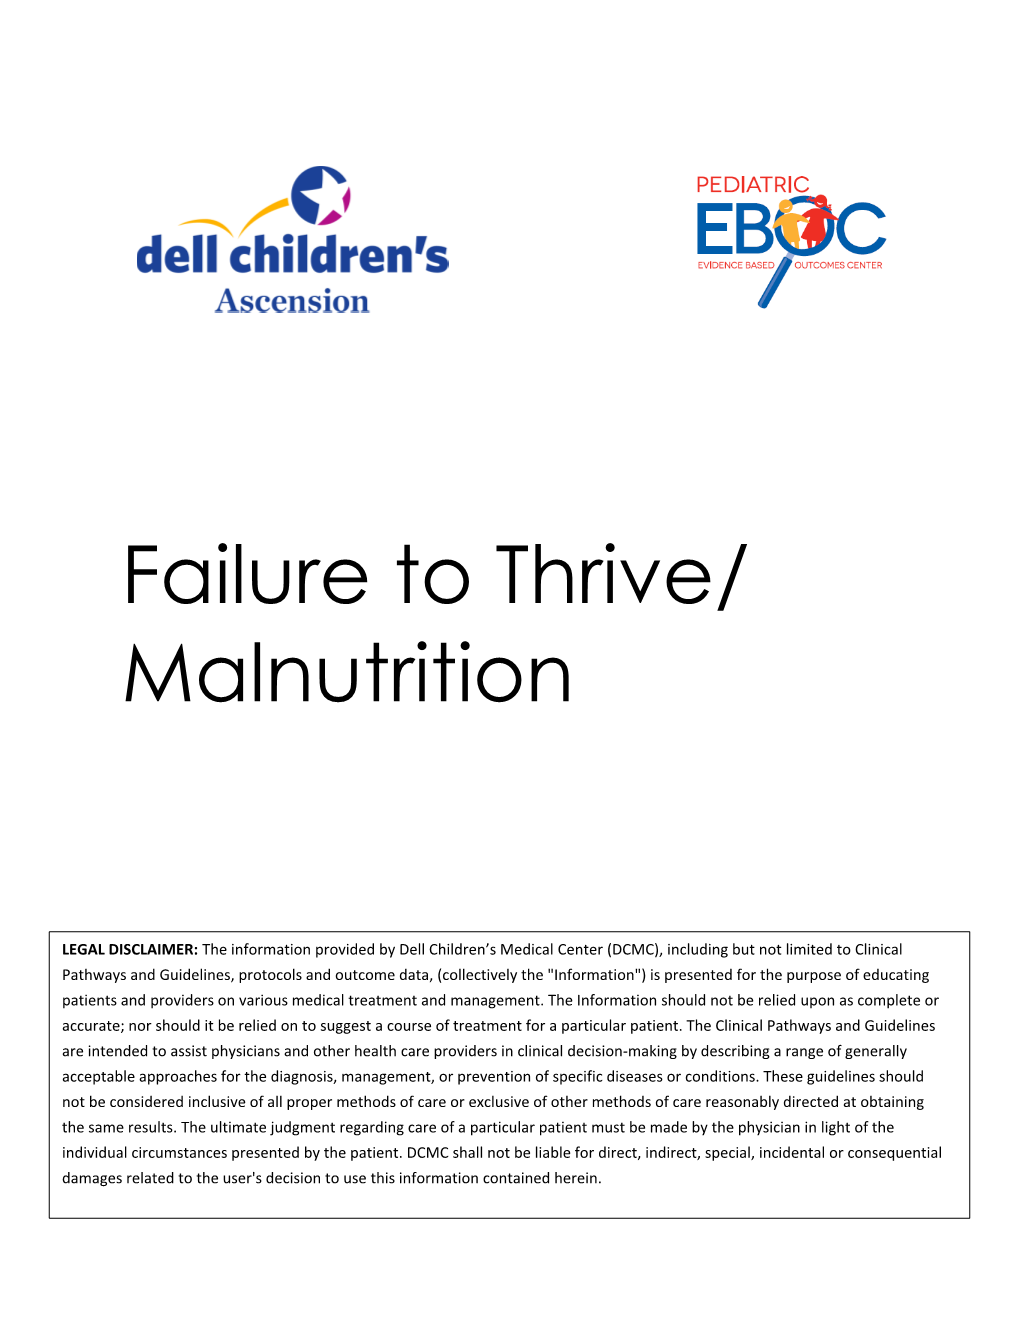 Failure to Thrive/ Malnutrition Guideline